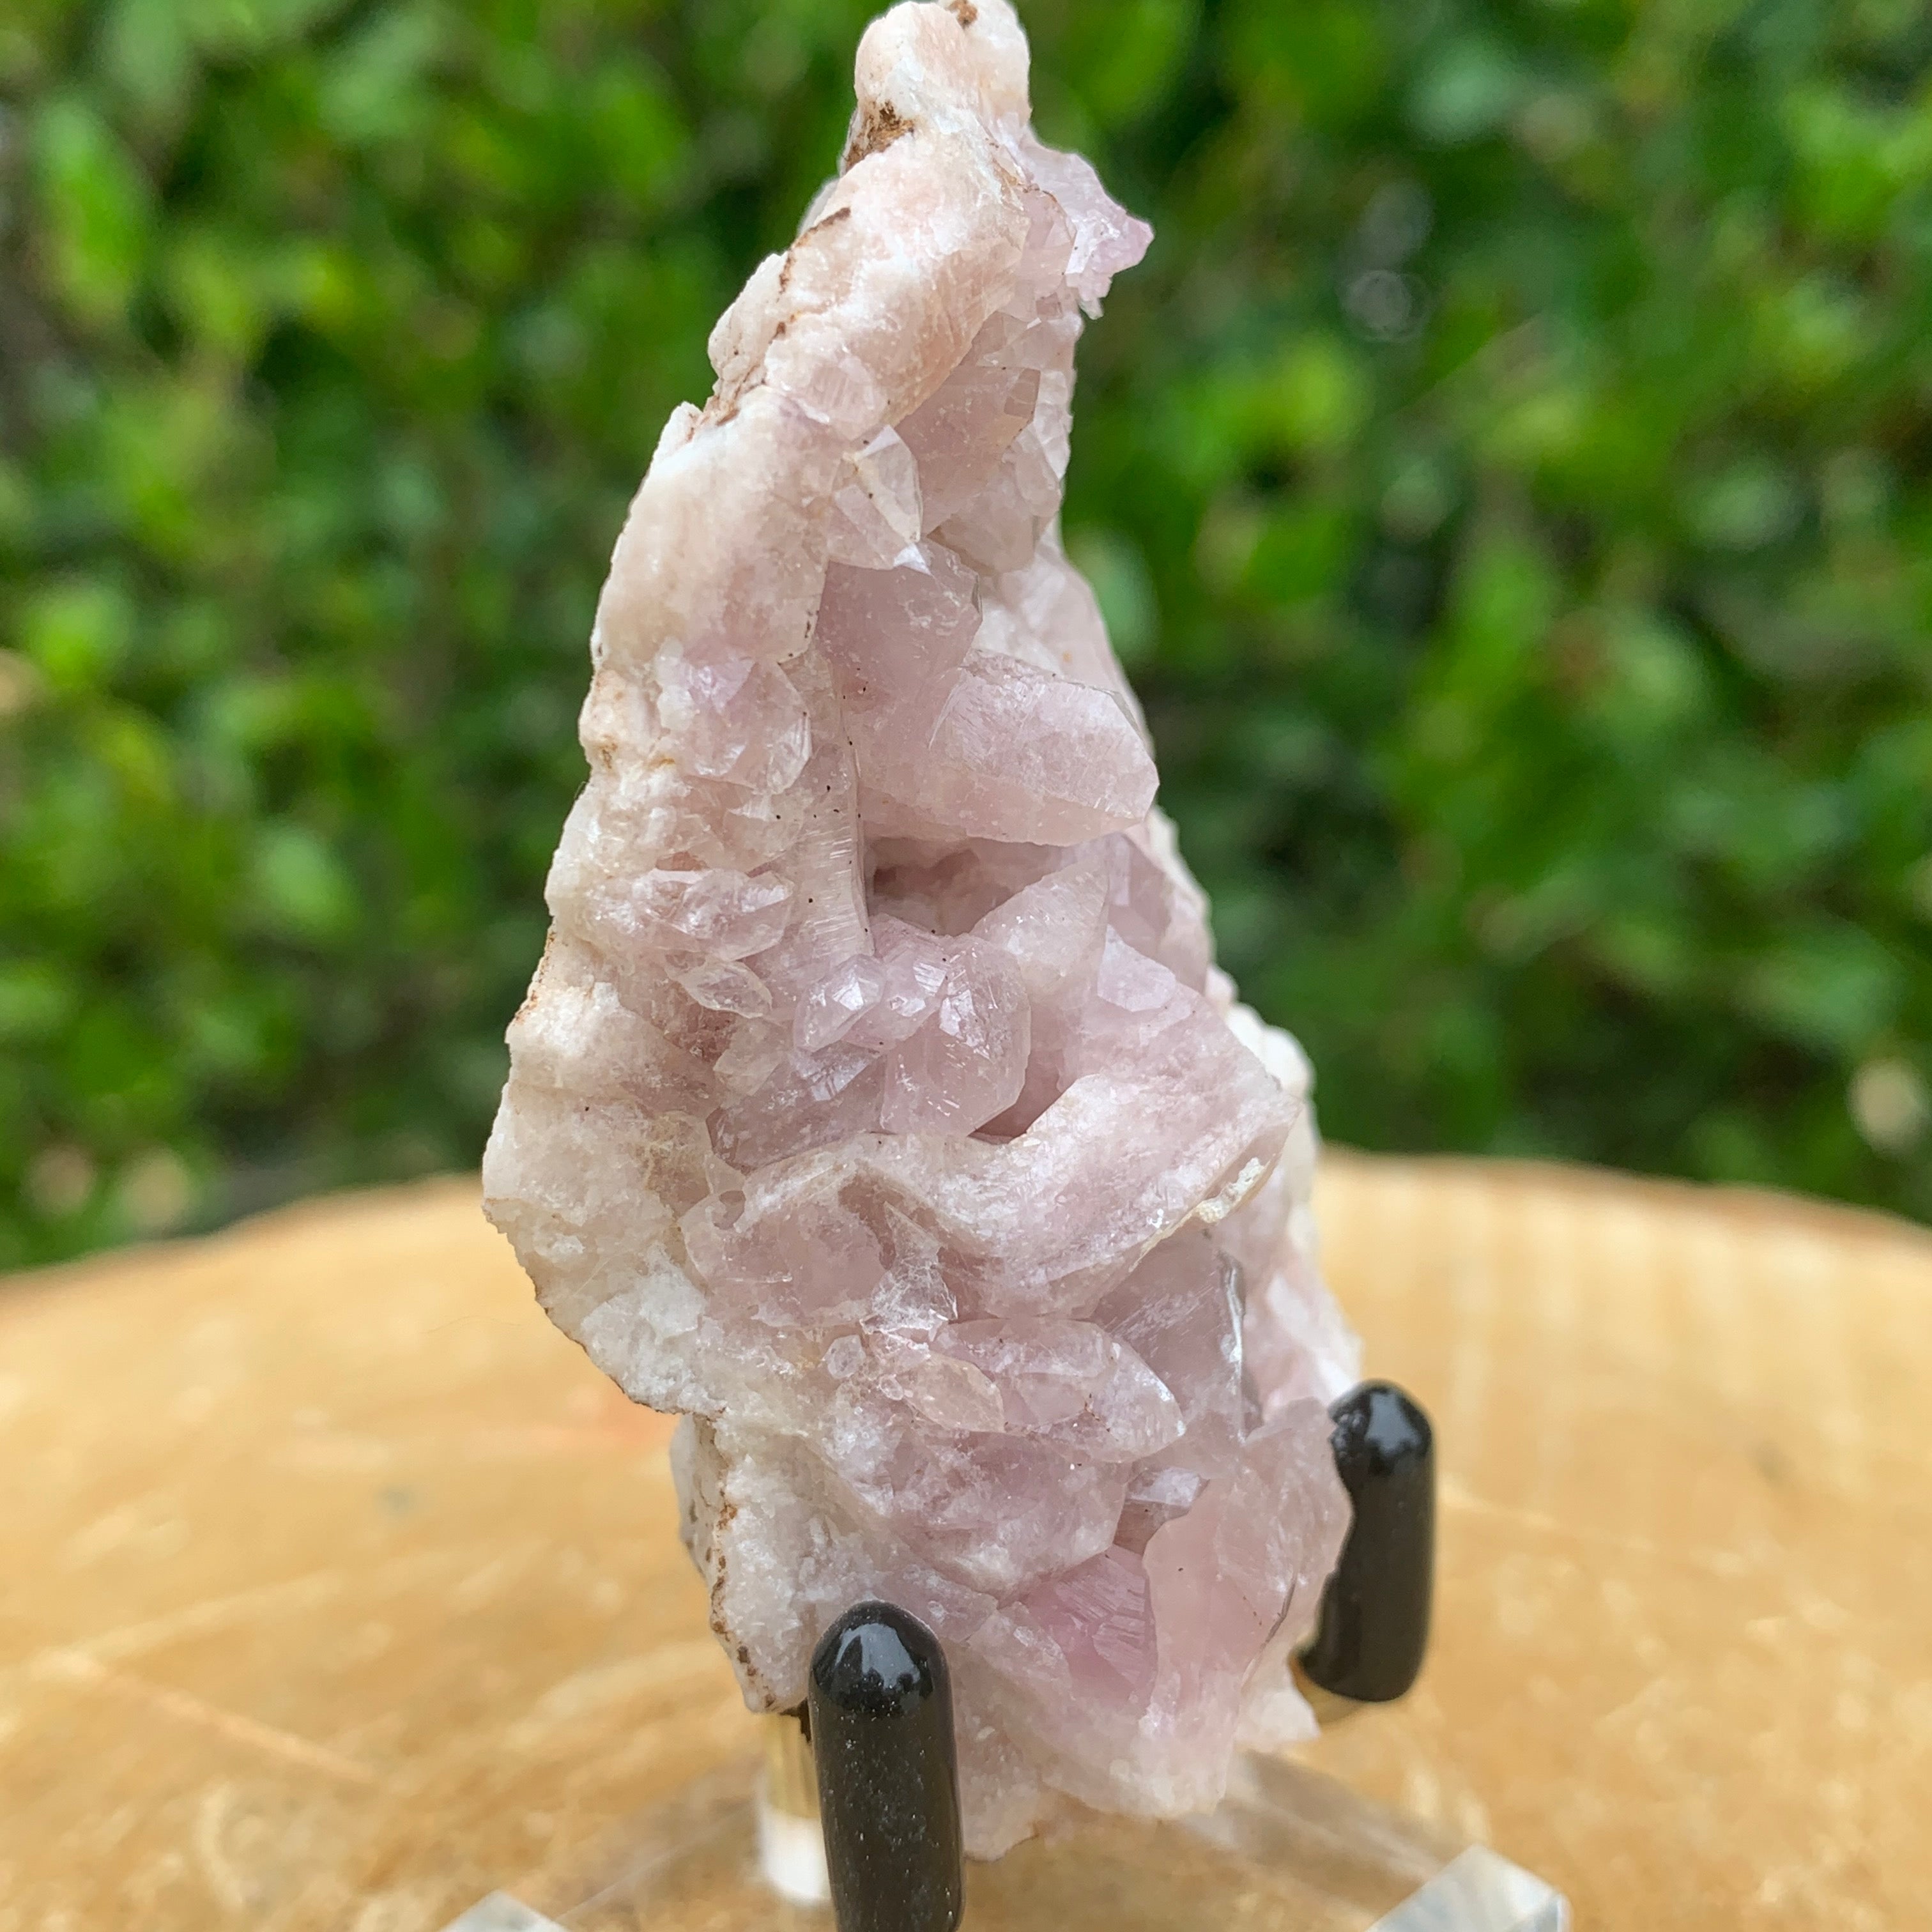 50.0g 6x4x2cm Pink Pink Amethyst from Argentina